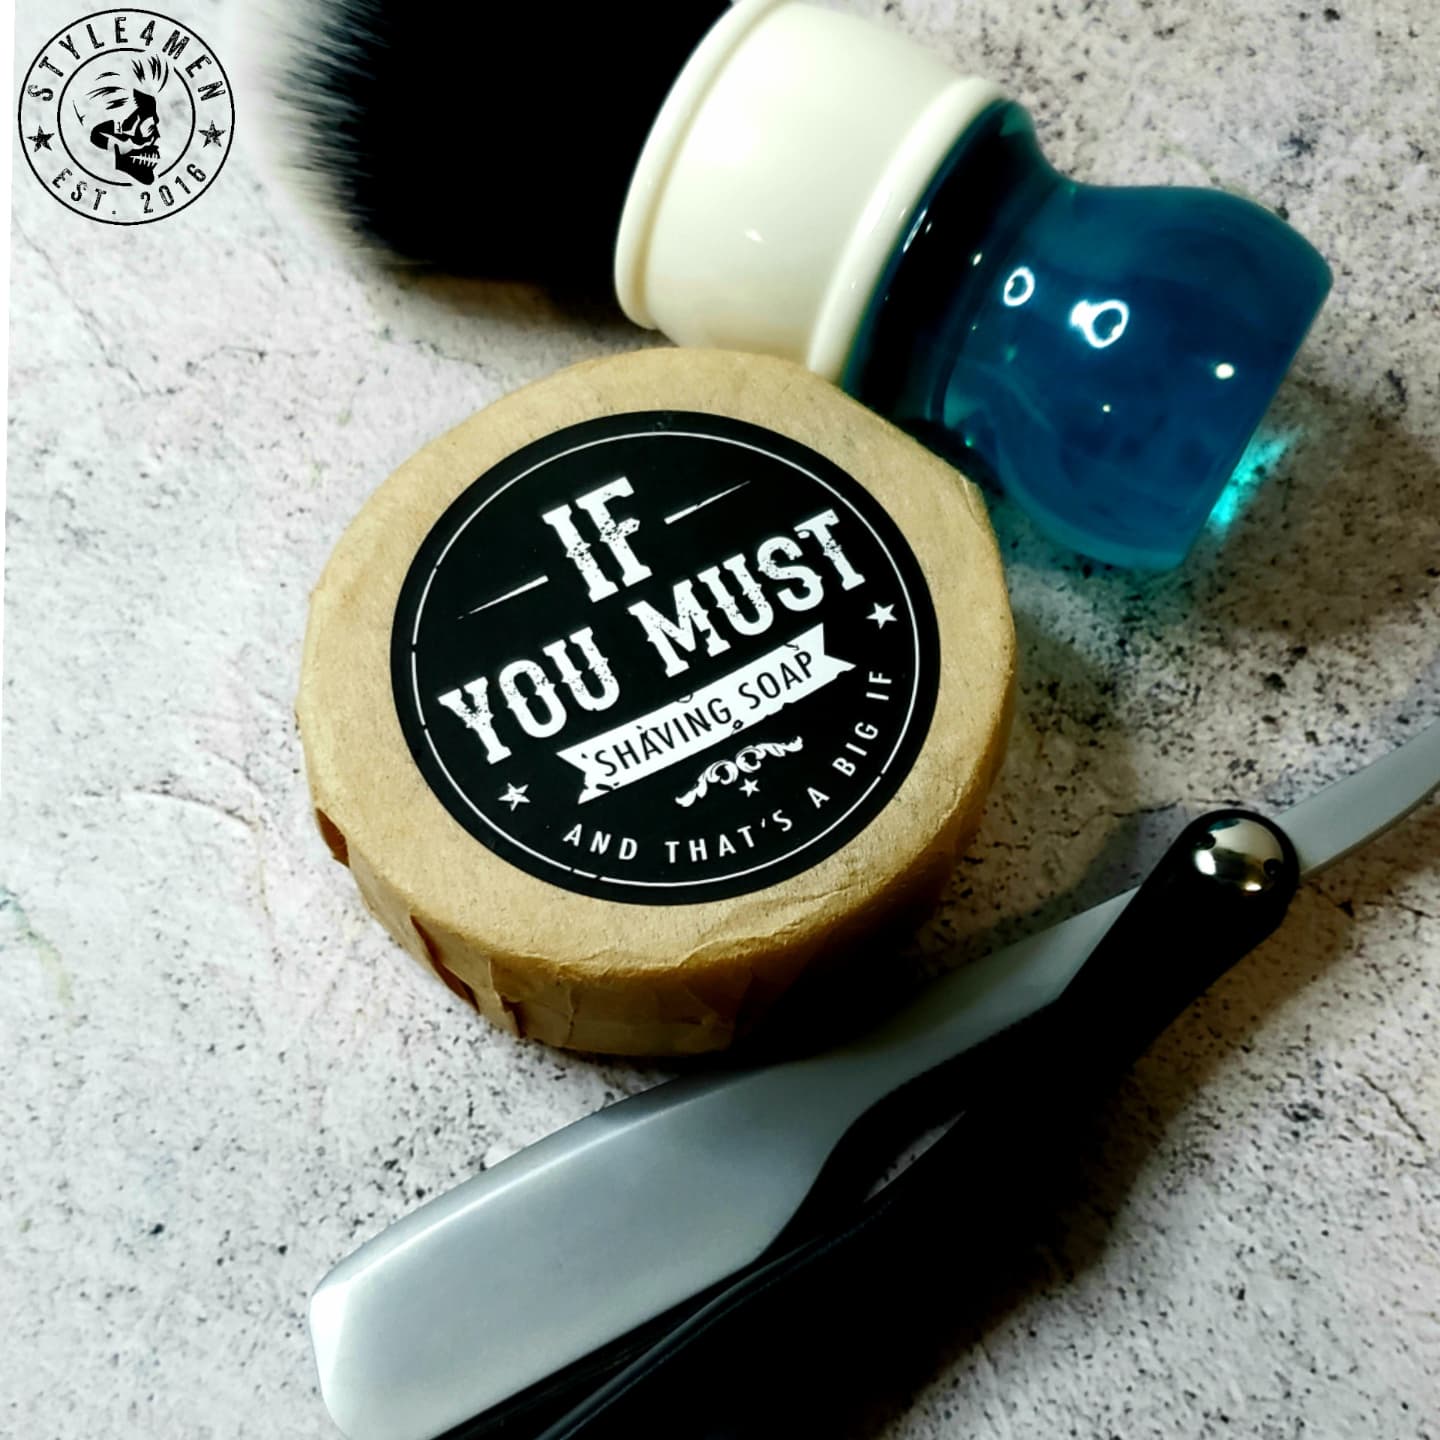 The “If you must” Shave Soap by Sussex Beard